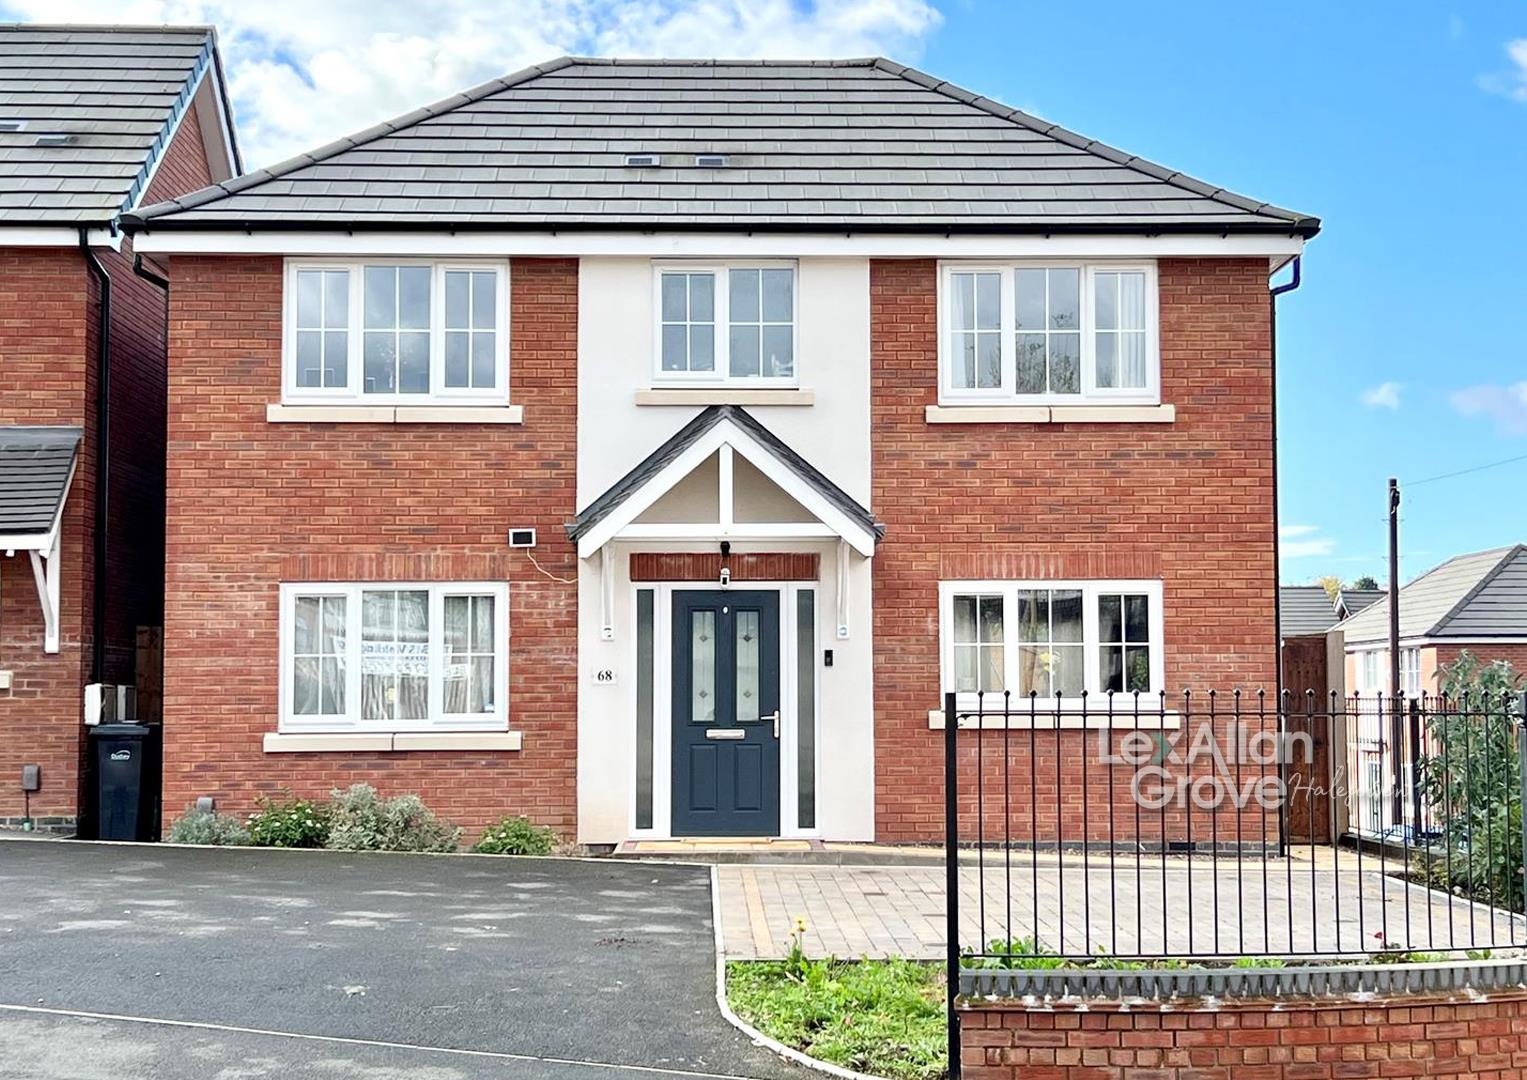 3 bed detached house for sale in Banners Lane, Halesowen  - Property Image 1